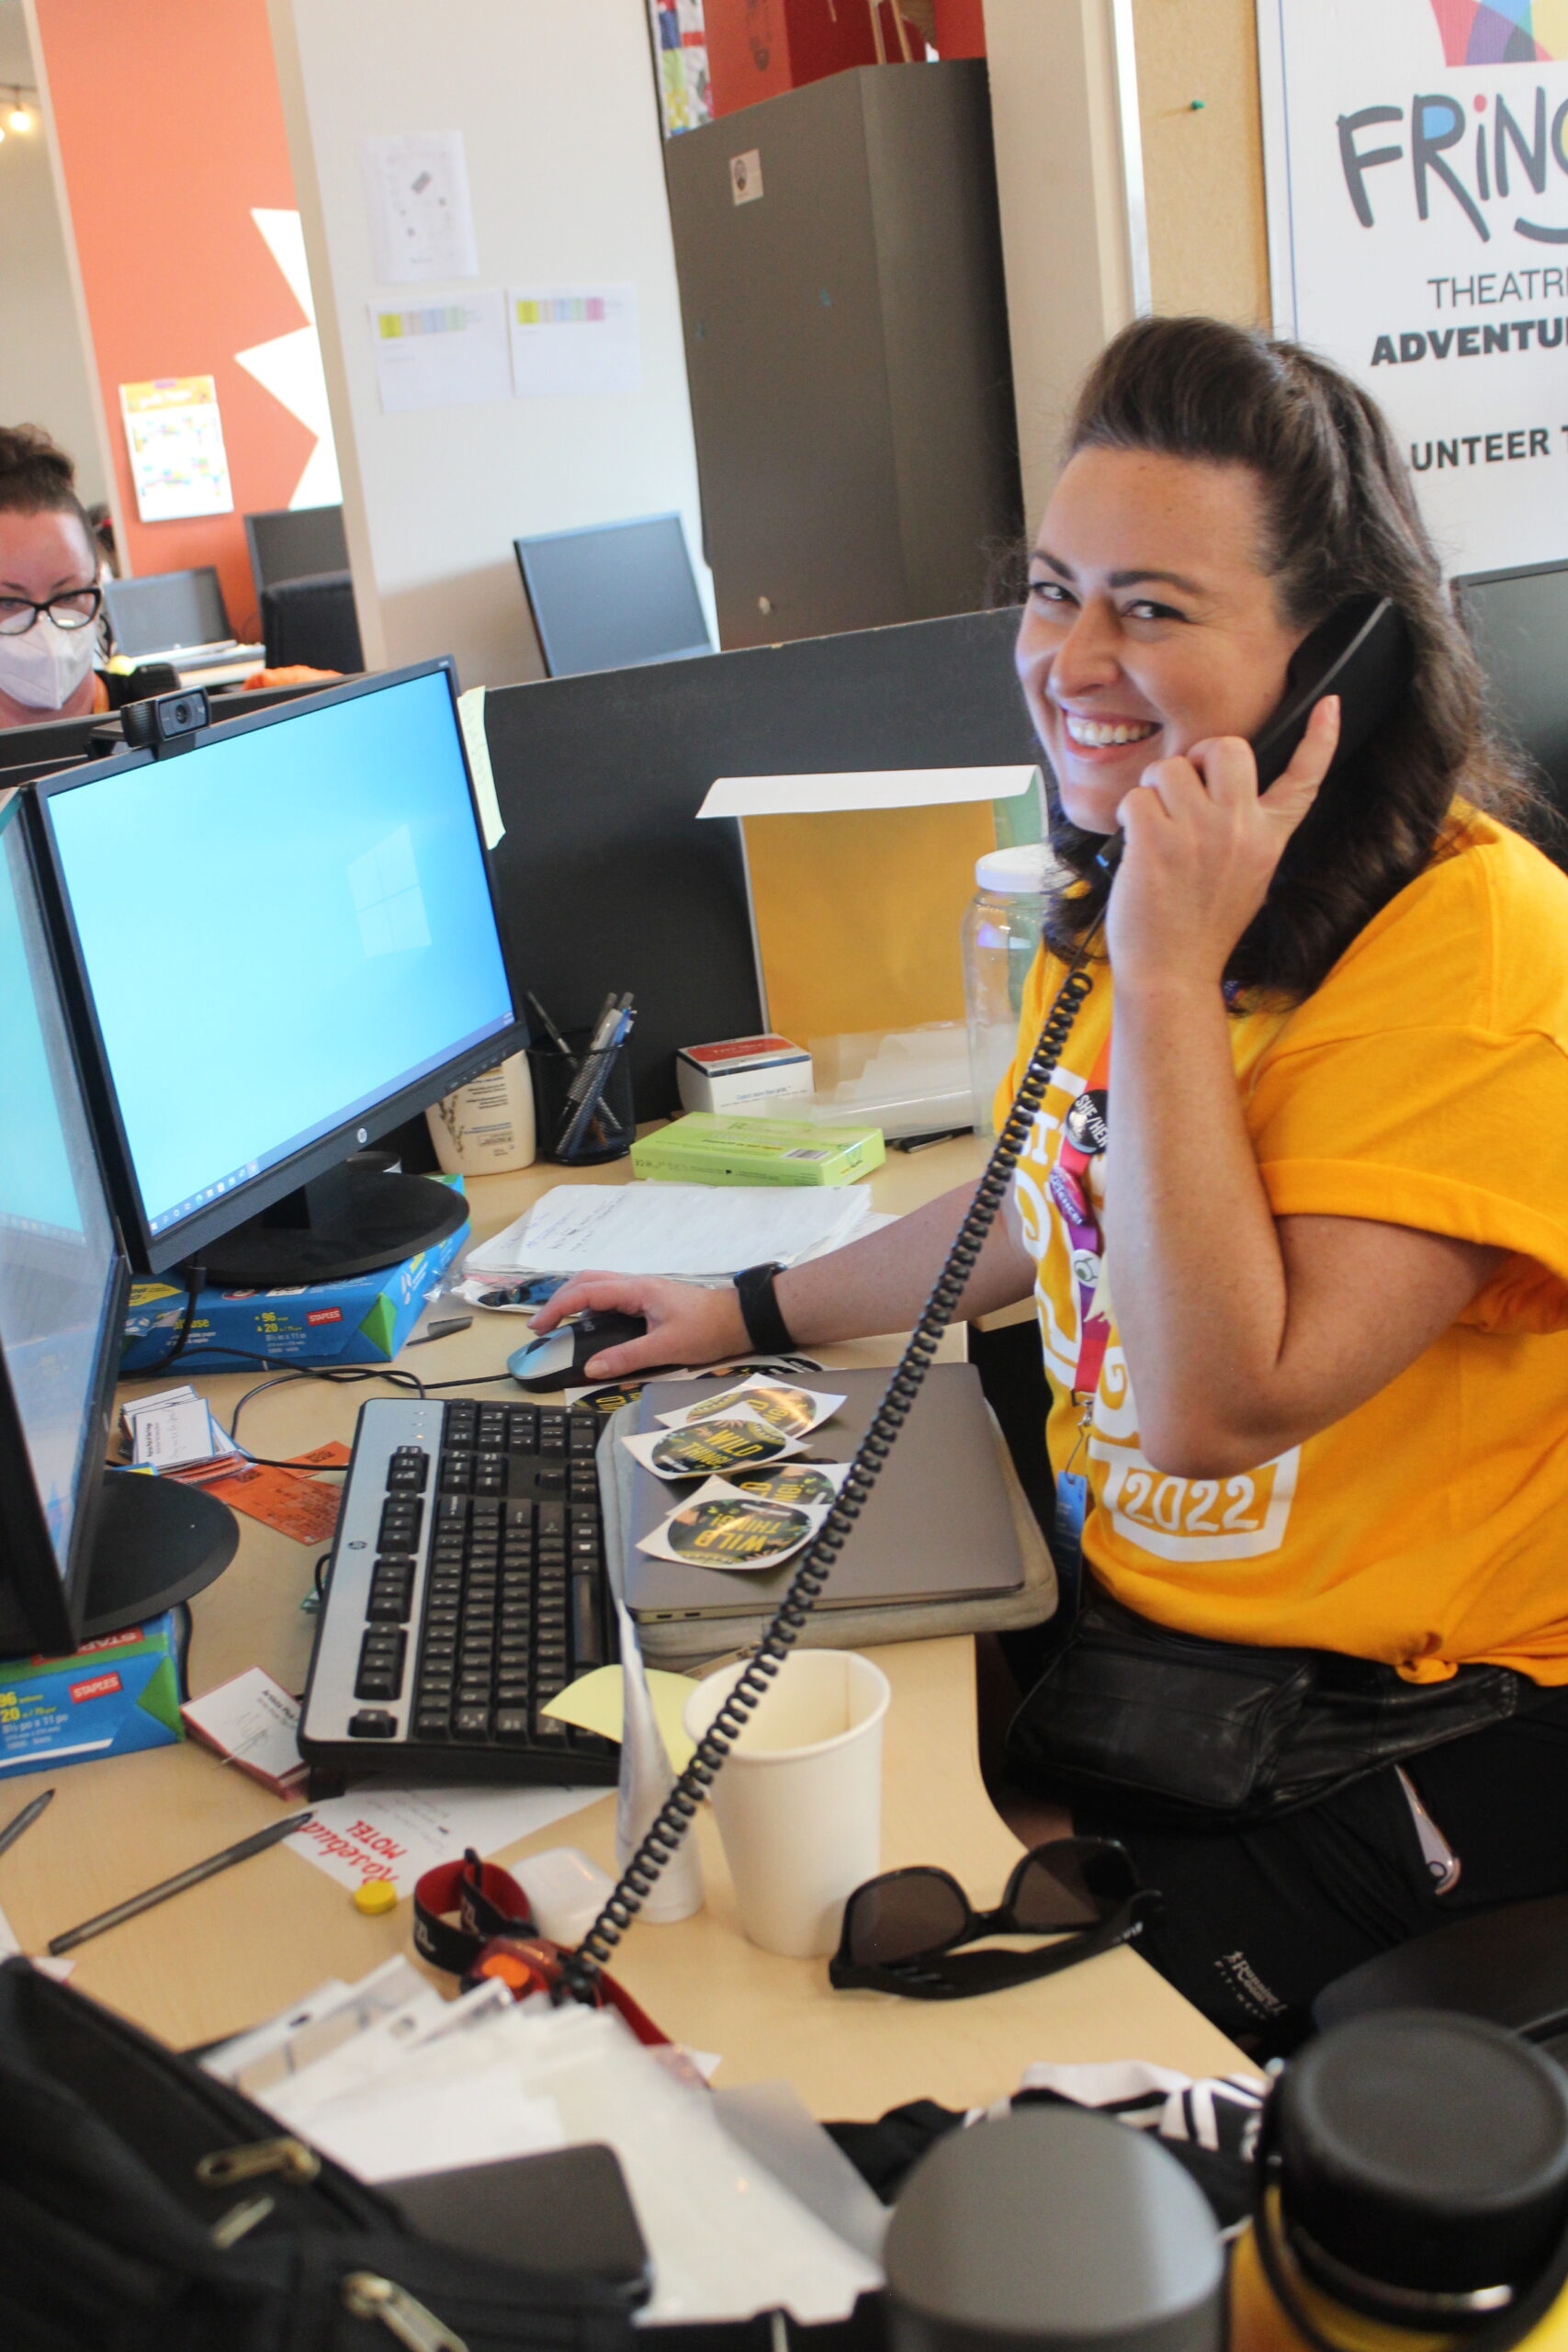 A Volunteer on the phone in front of a computer, smiling.